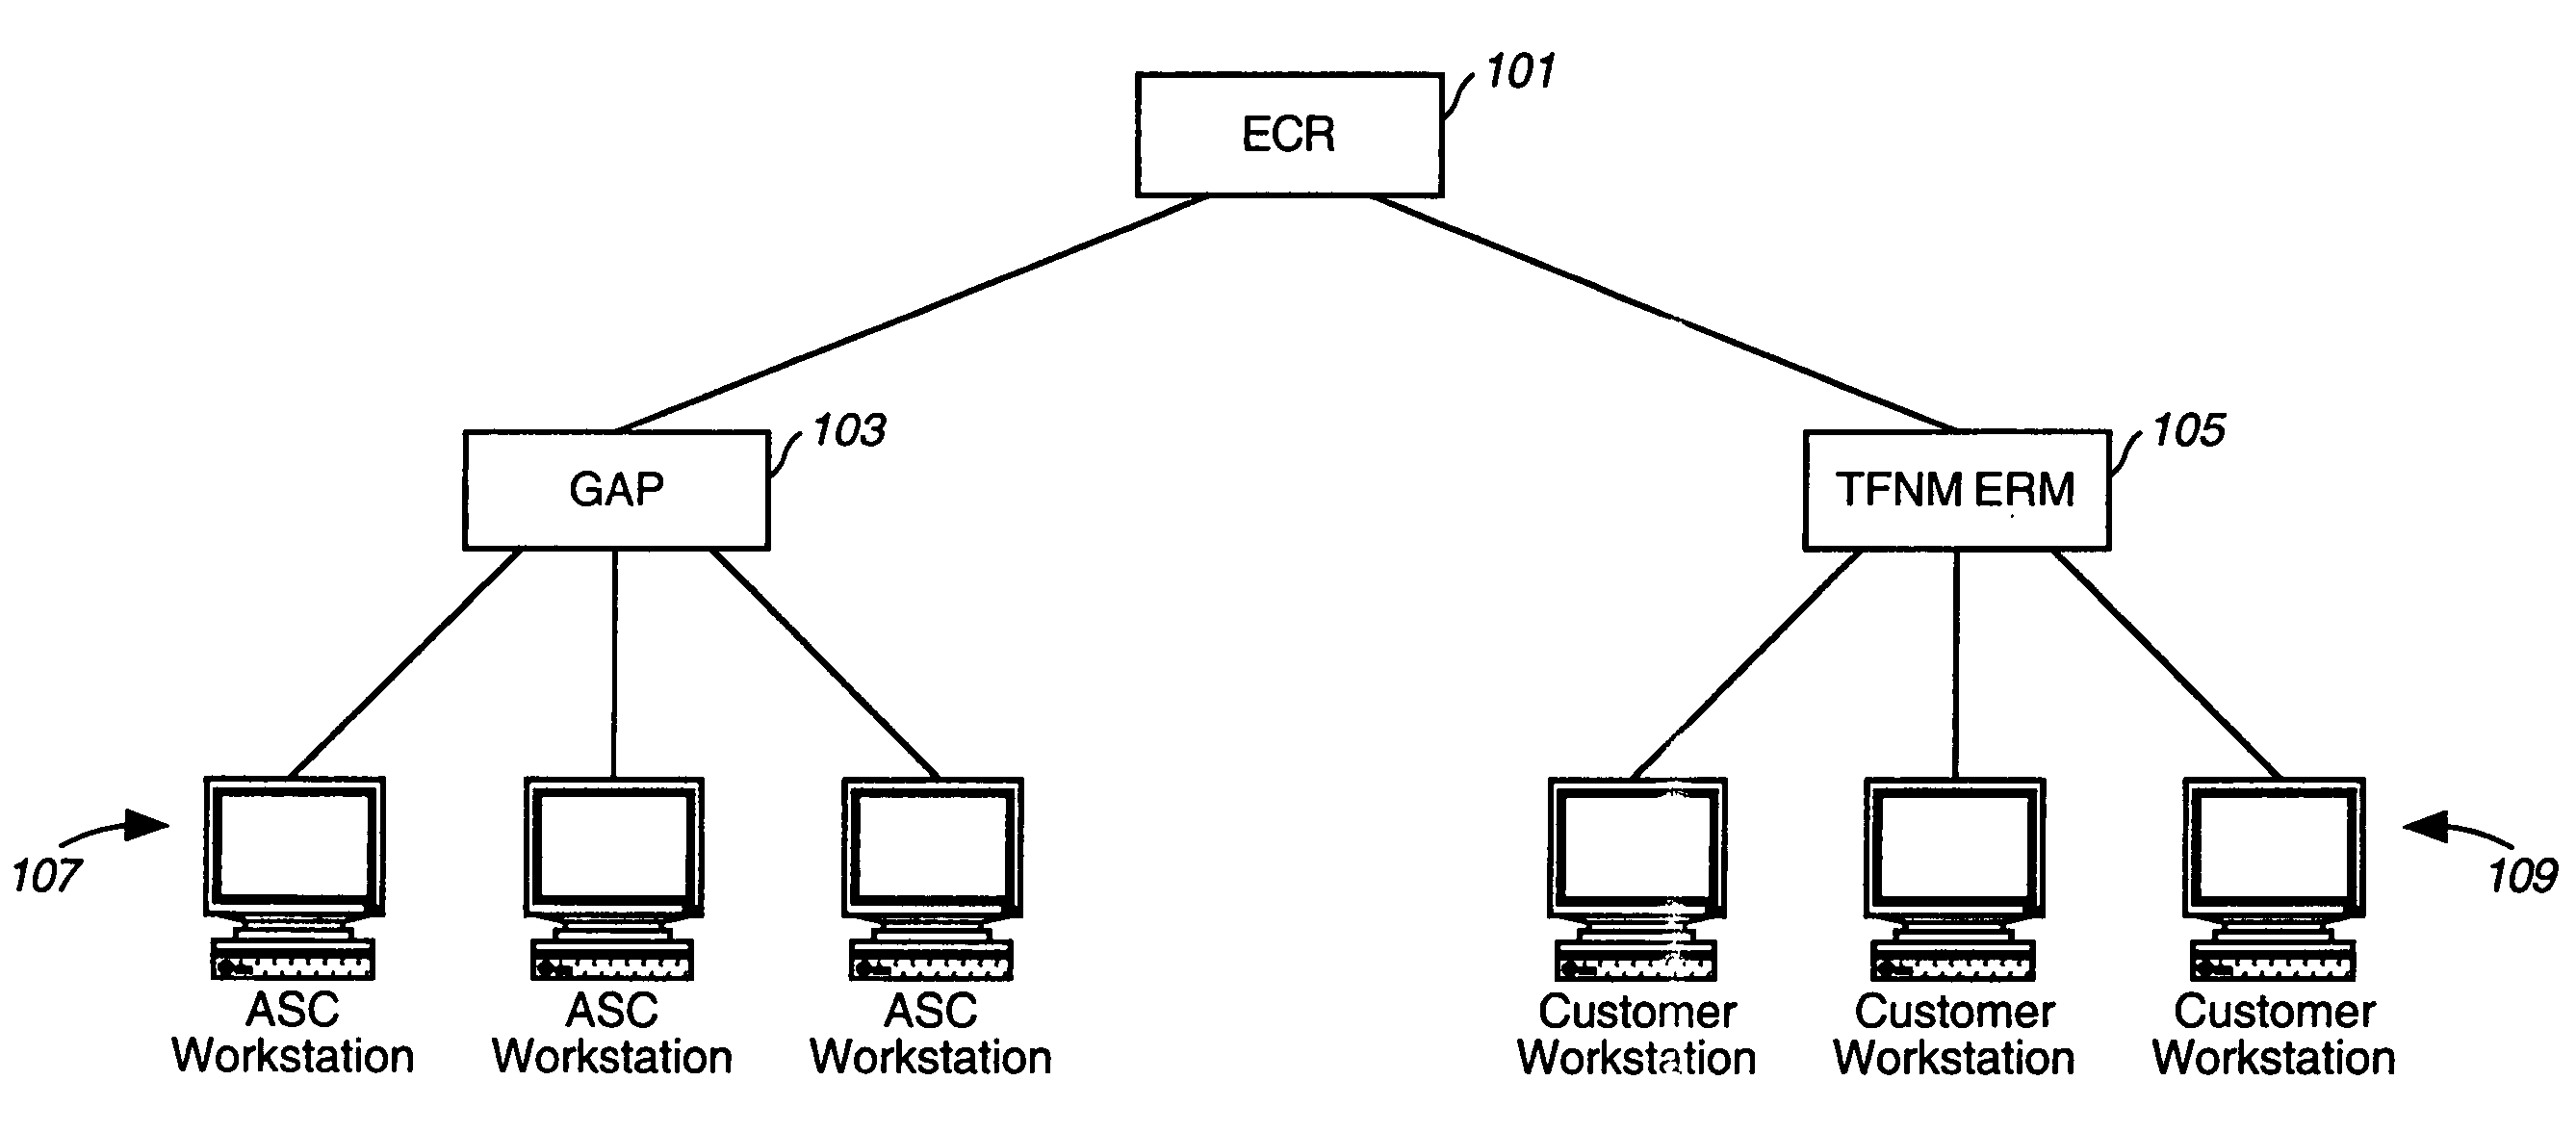 Graphical user interface (GUI) based call application system